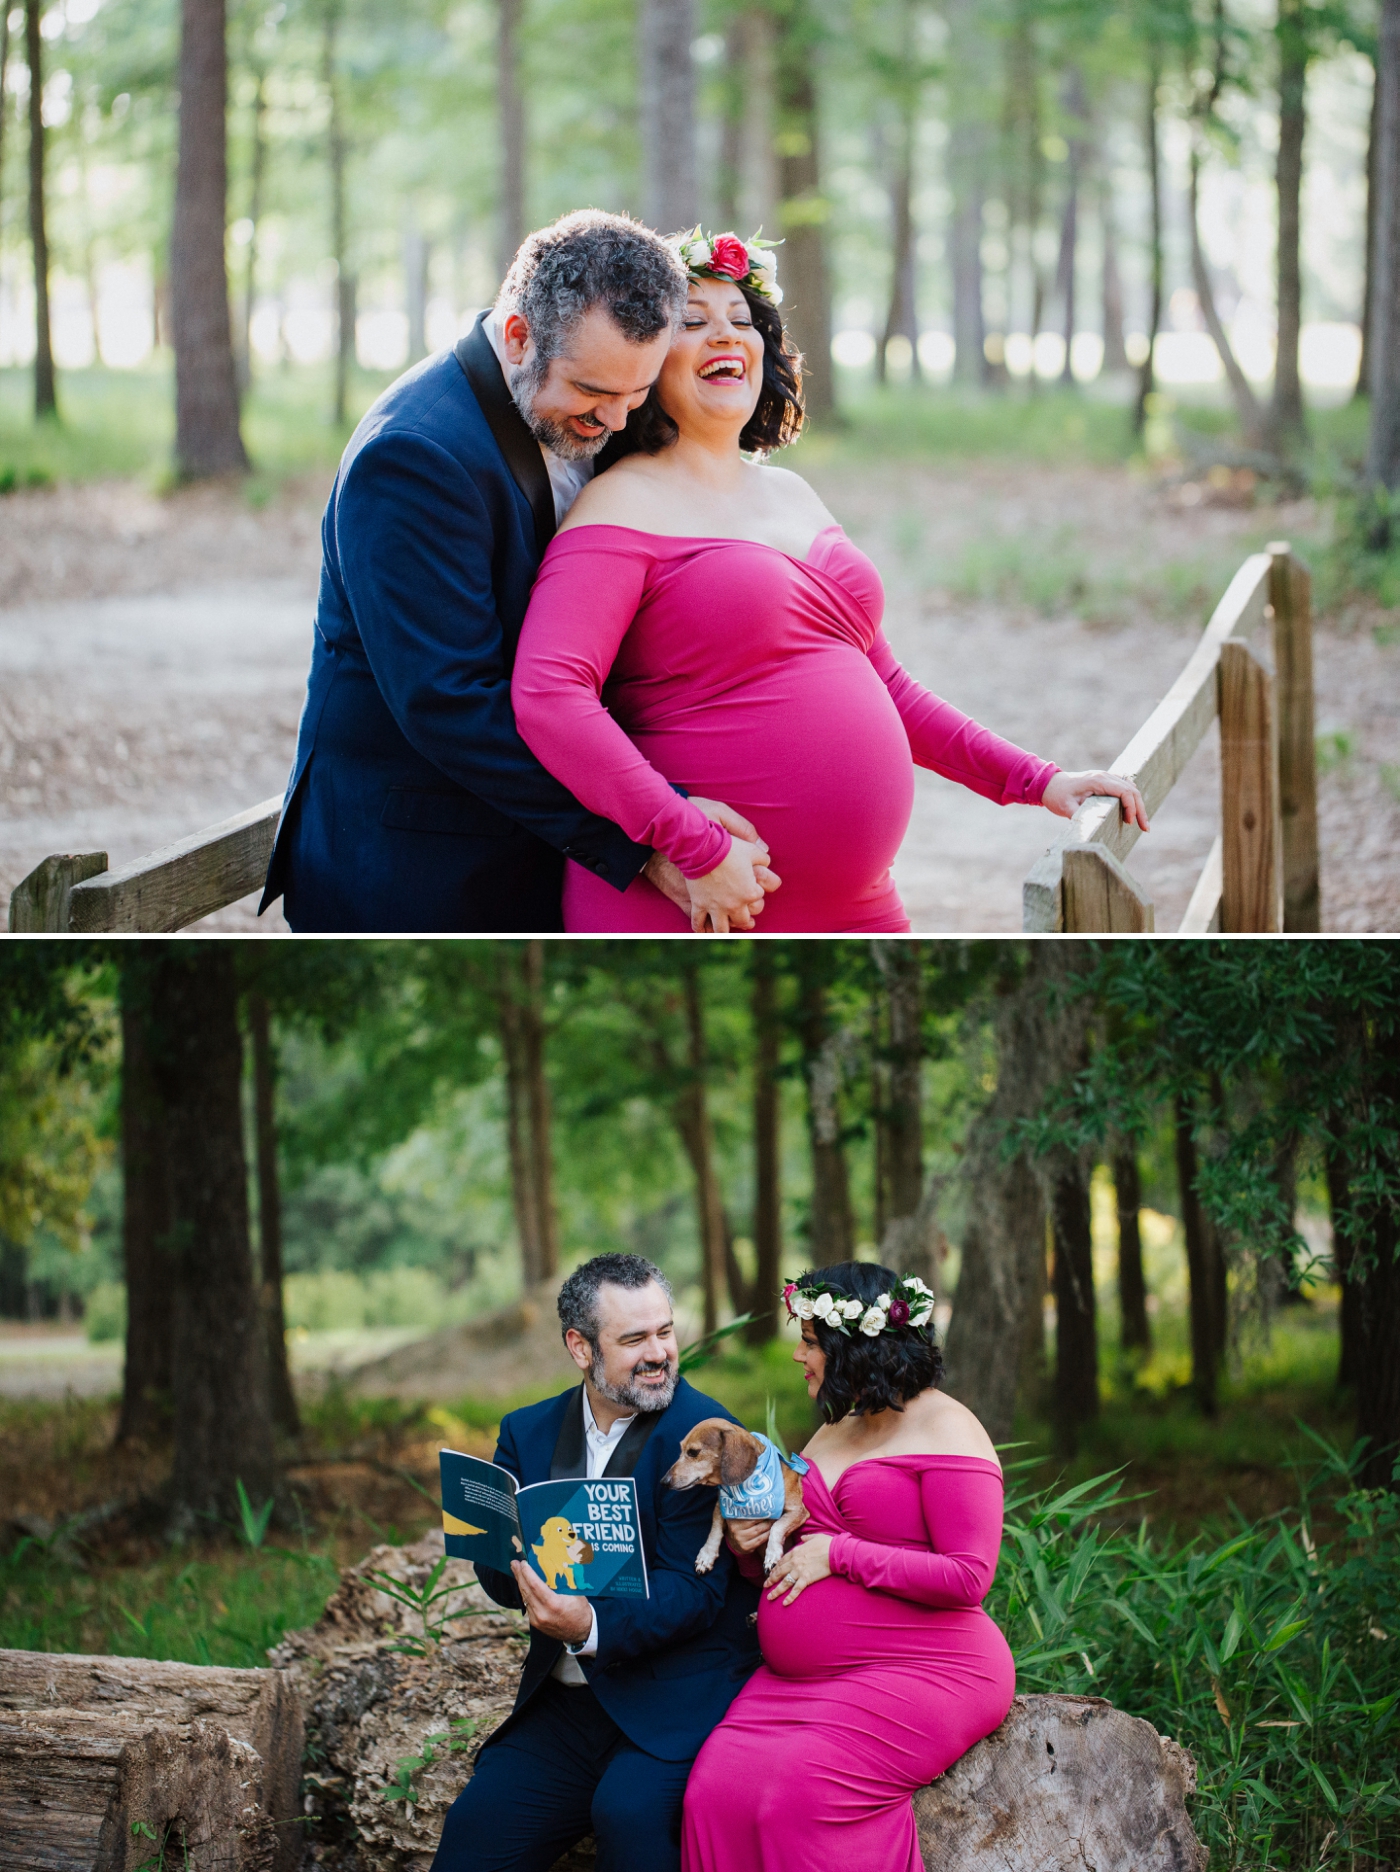 Colorful maternity session in Pooler, Georgia